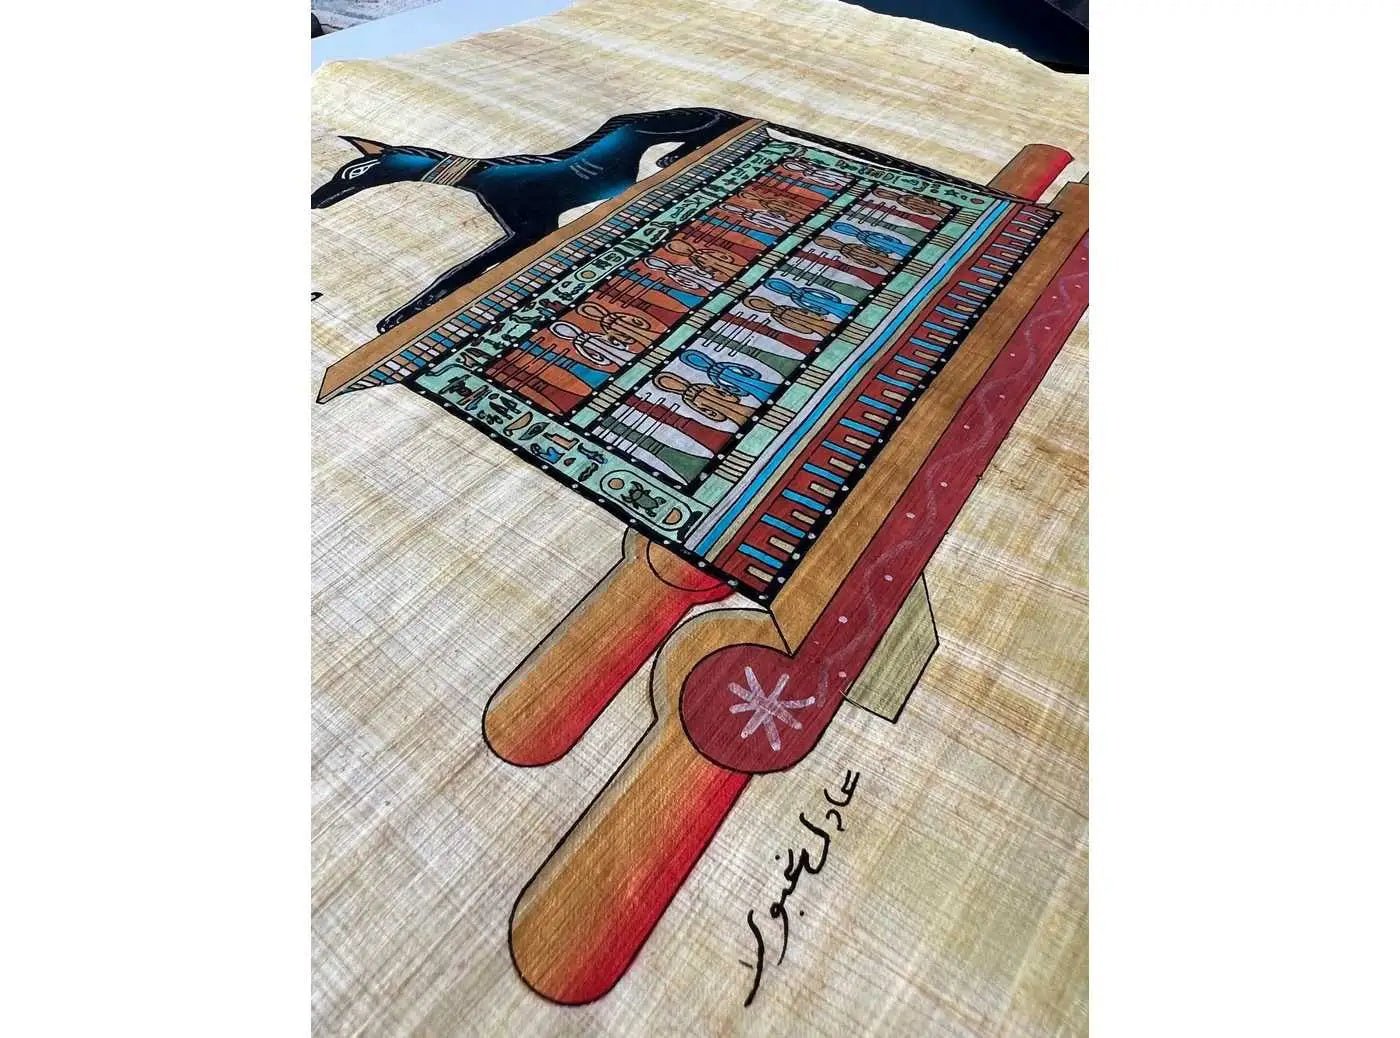 God of Dead Anubis - Handmade in Egypt - Unique Ancient Egyptian Art - Egypt Papyrus Painting